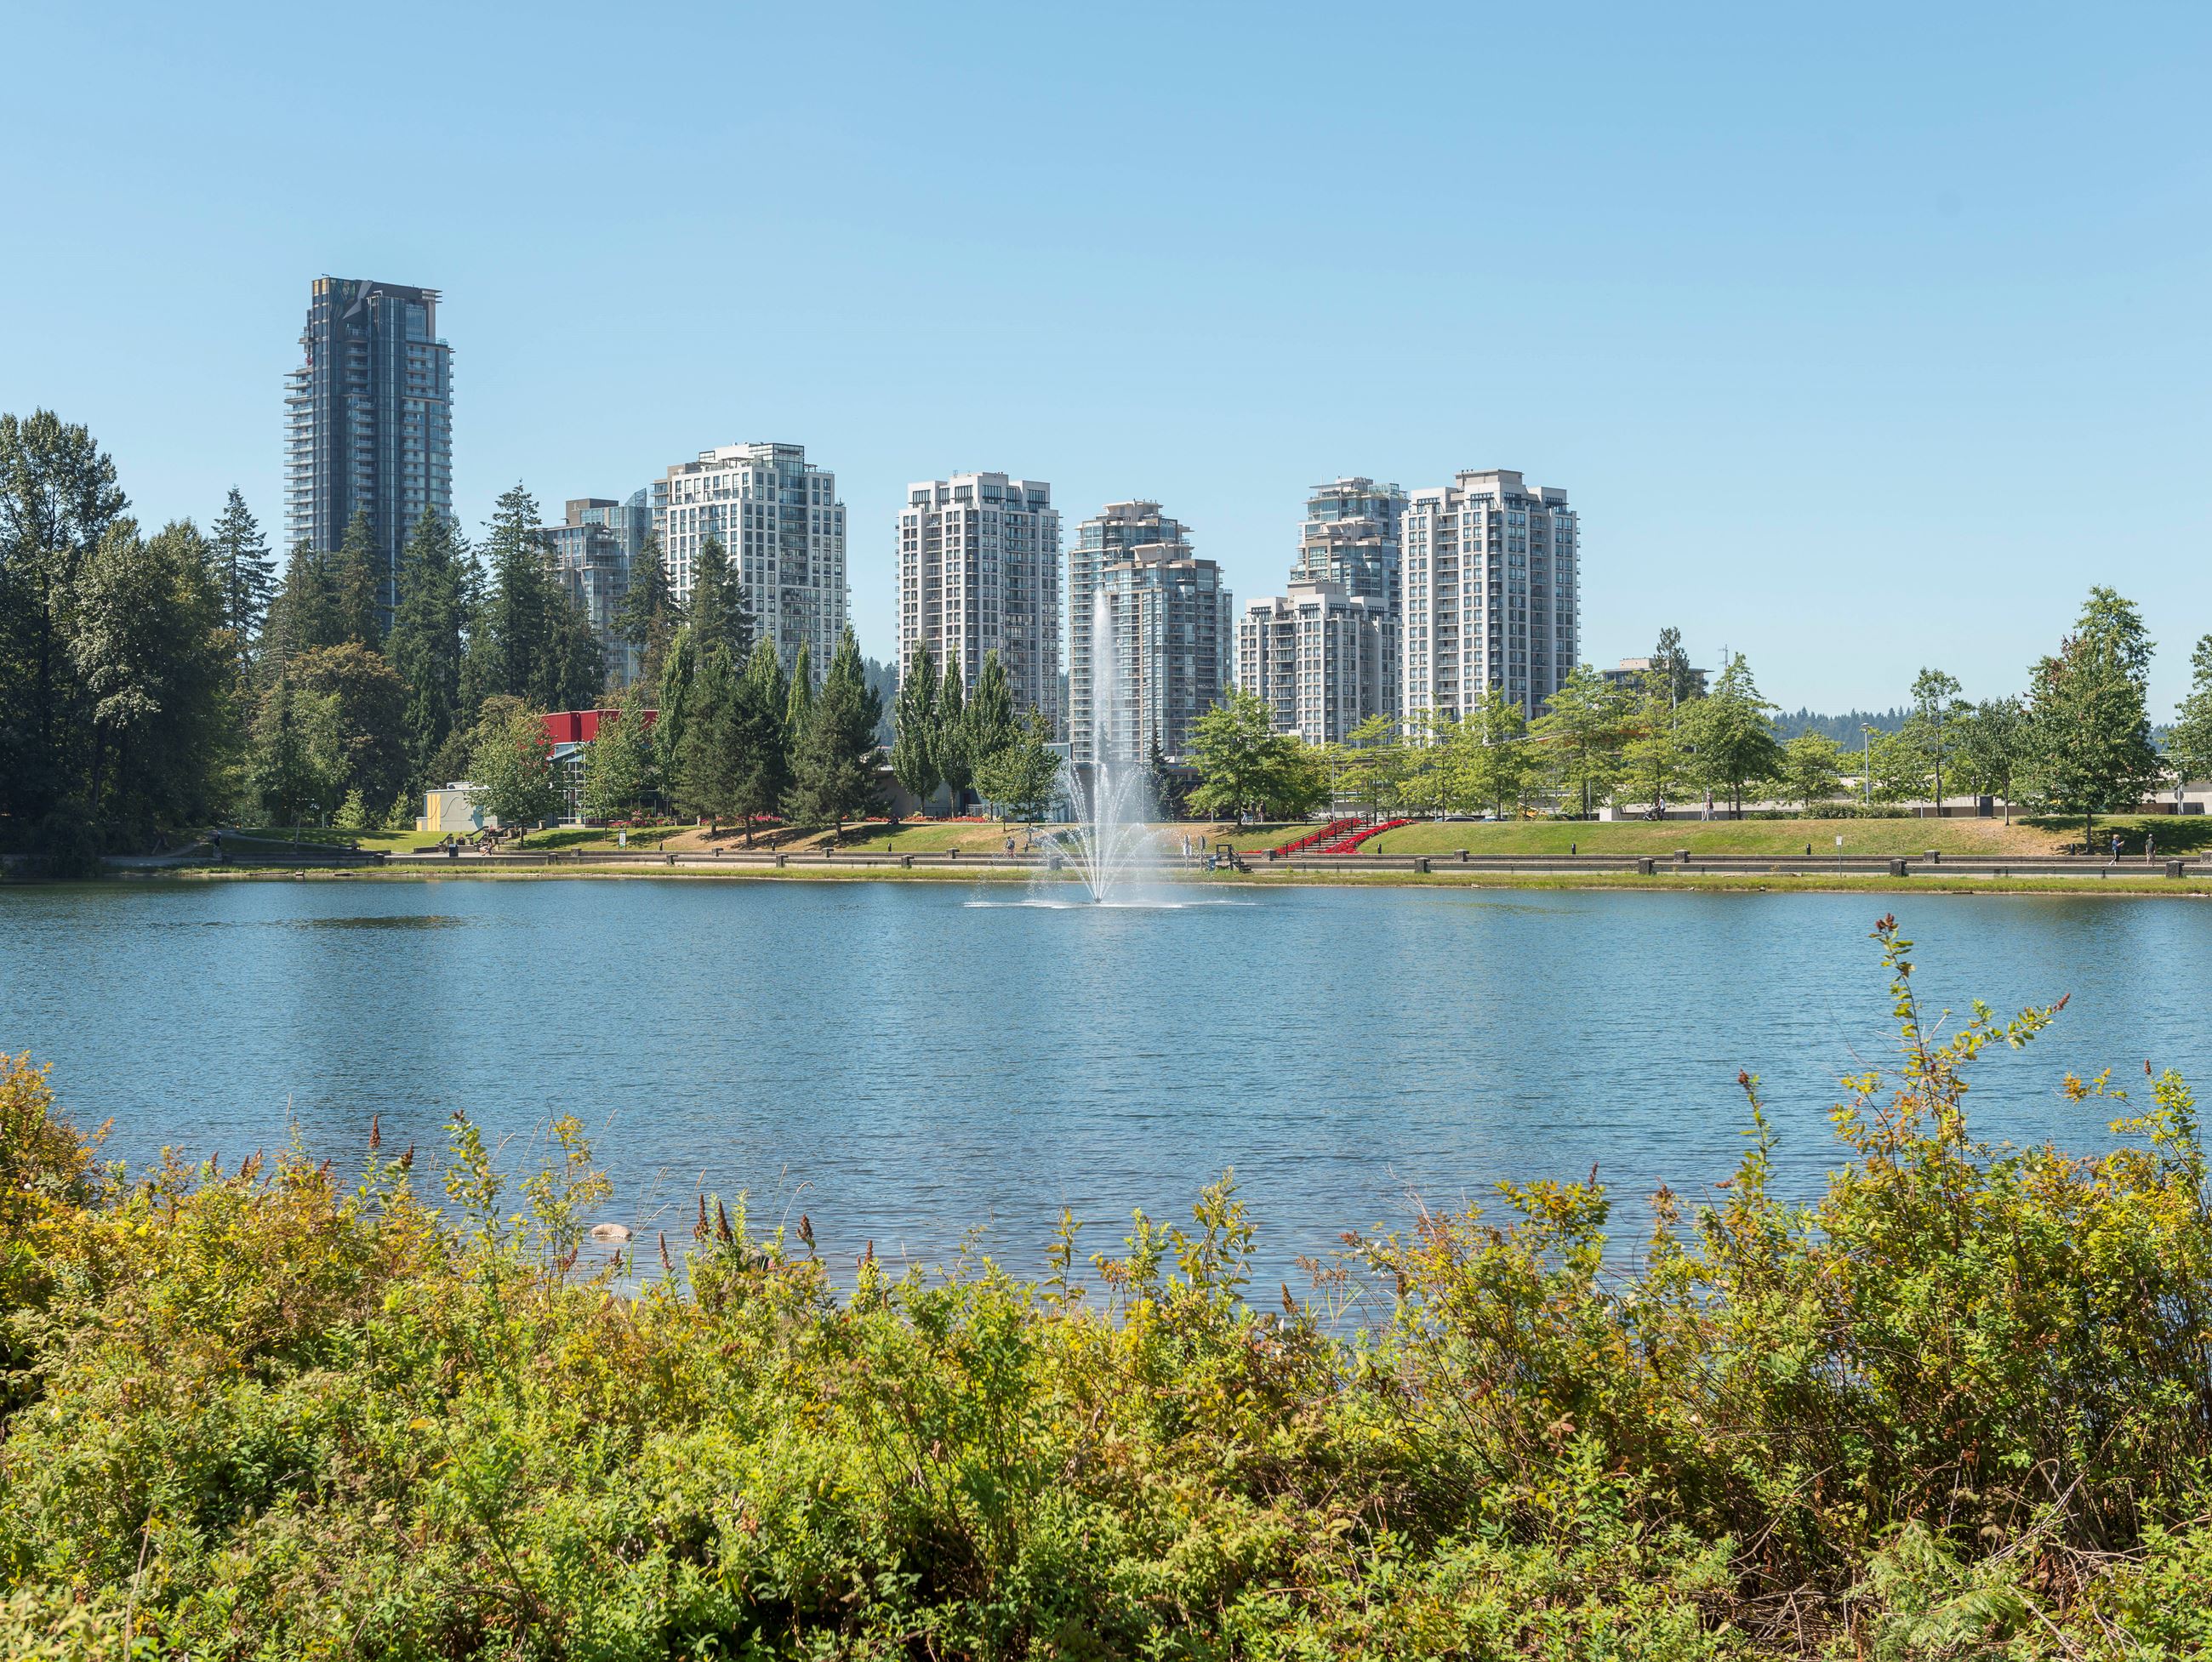 A view of Coquitlam's City Centre looking across Lafarge Lake